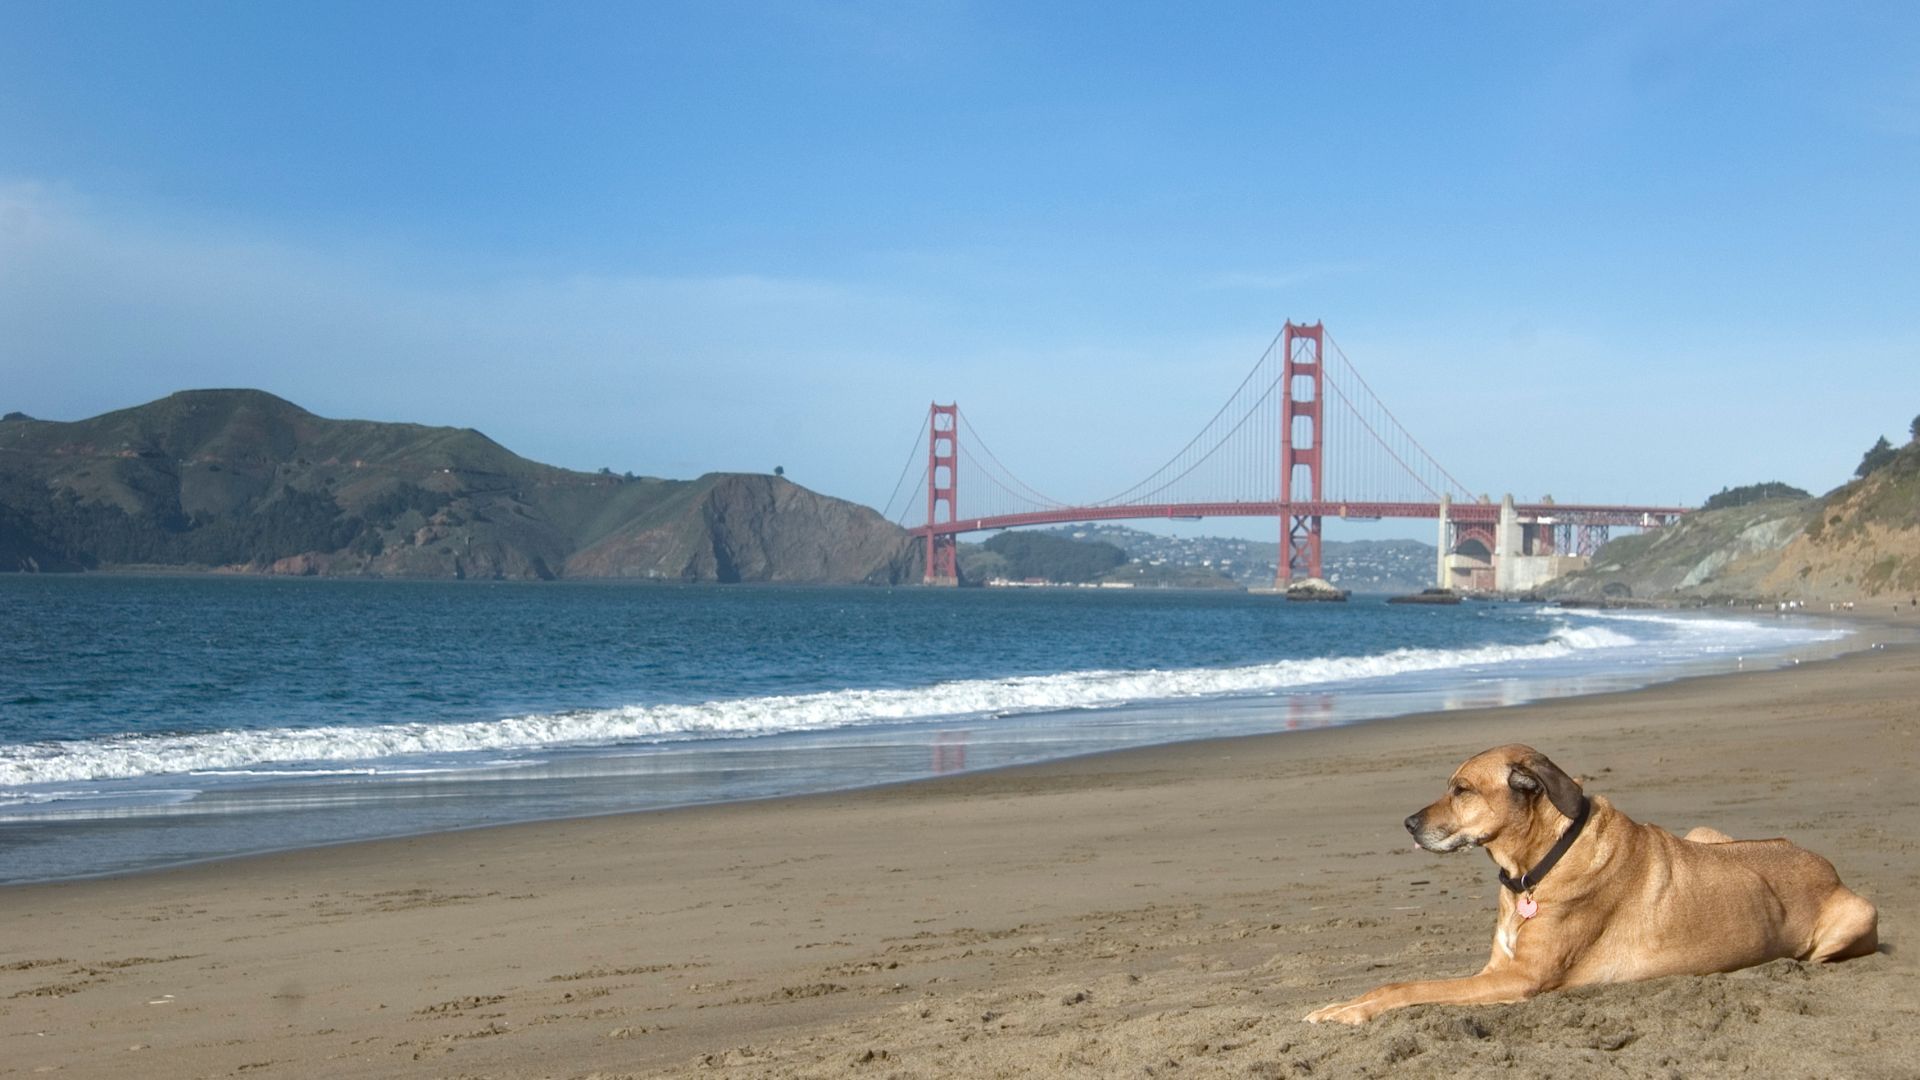 <p>                     Help your canine meet new furry pals at Fort Funston, which allows your dog to be off its leash, just as long as you have your pet trained and under voice command. With a quarter of a mile worth of beach, even more trails and bluffs, there’s lots of room to explore.                   </p>